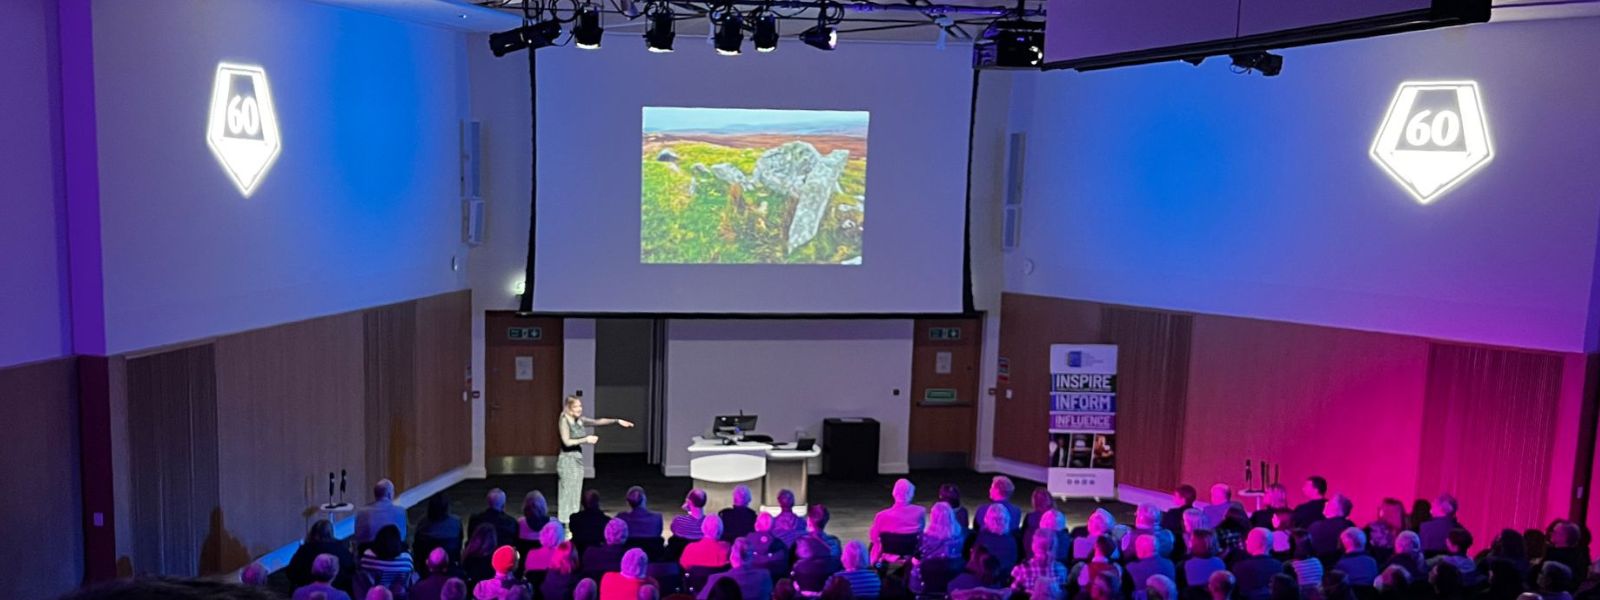 An audience watches Professor Alice Roberts' lecture in the Main Auditorium of the Technology and Innovation Centre